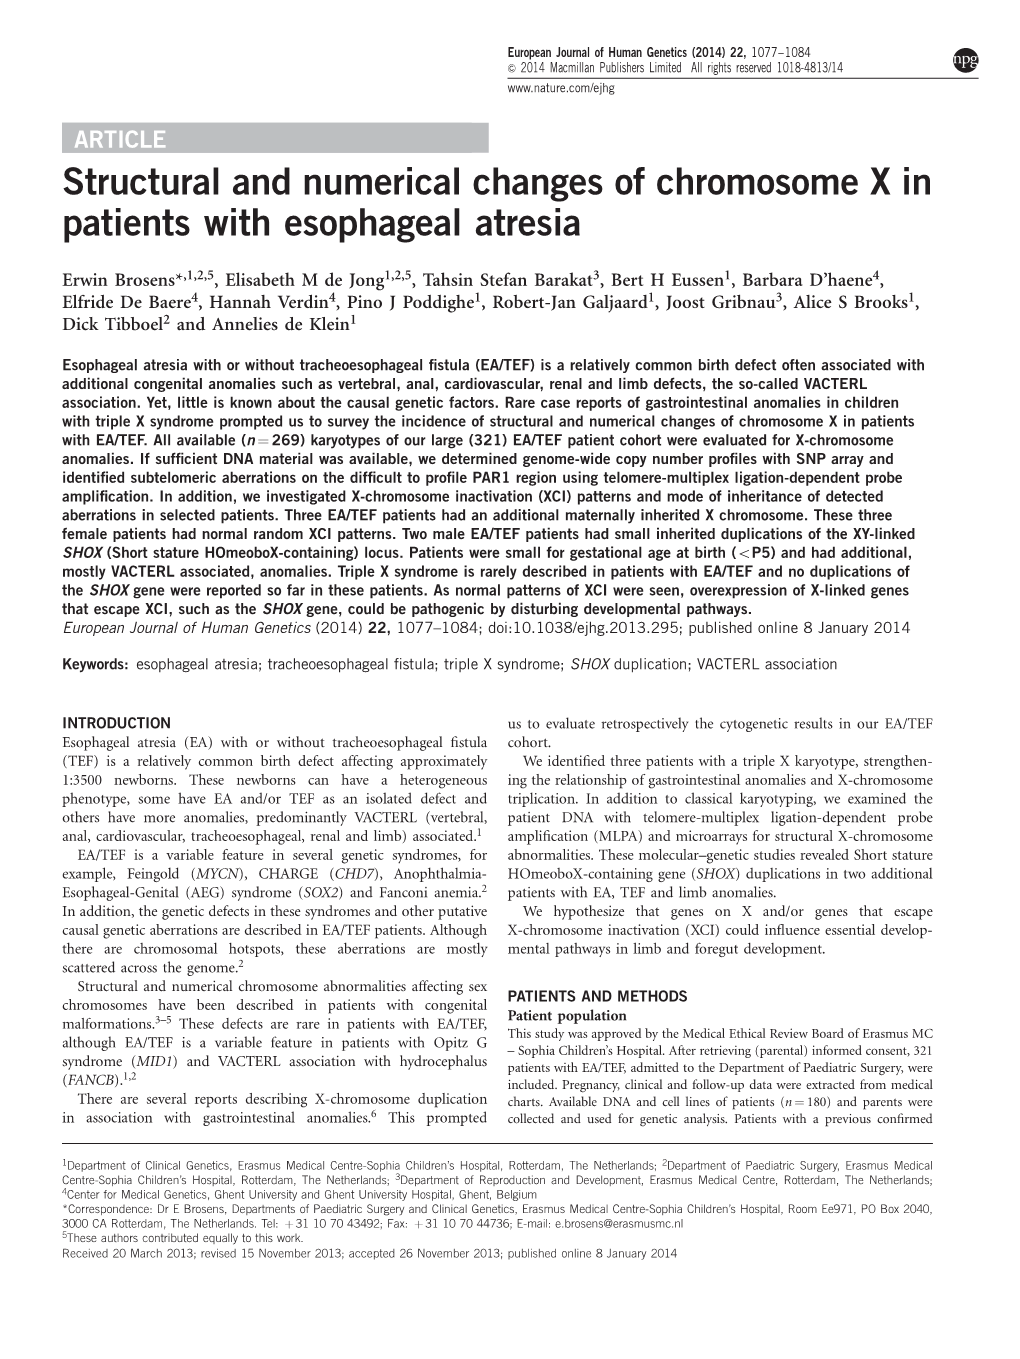 Structural and Numerical Changes of Chromosome X in Patients with Esophageal Atresia